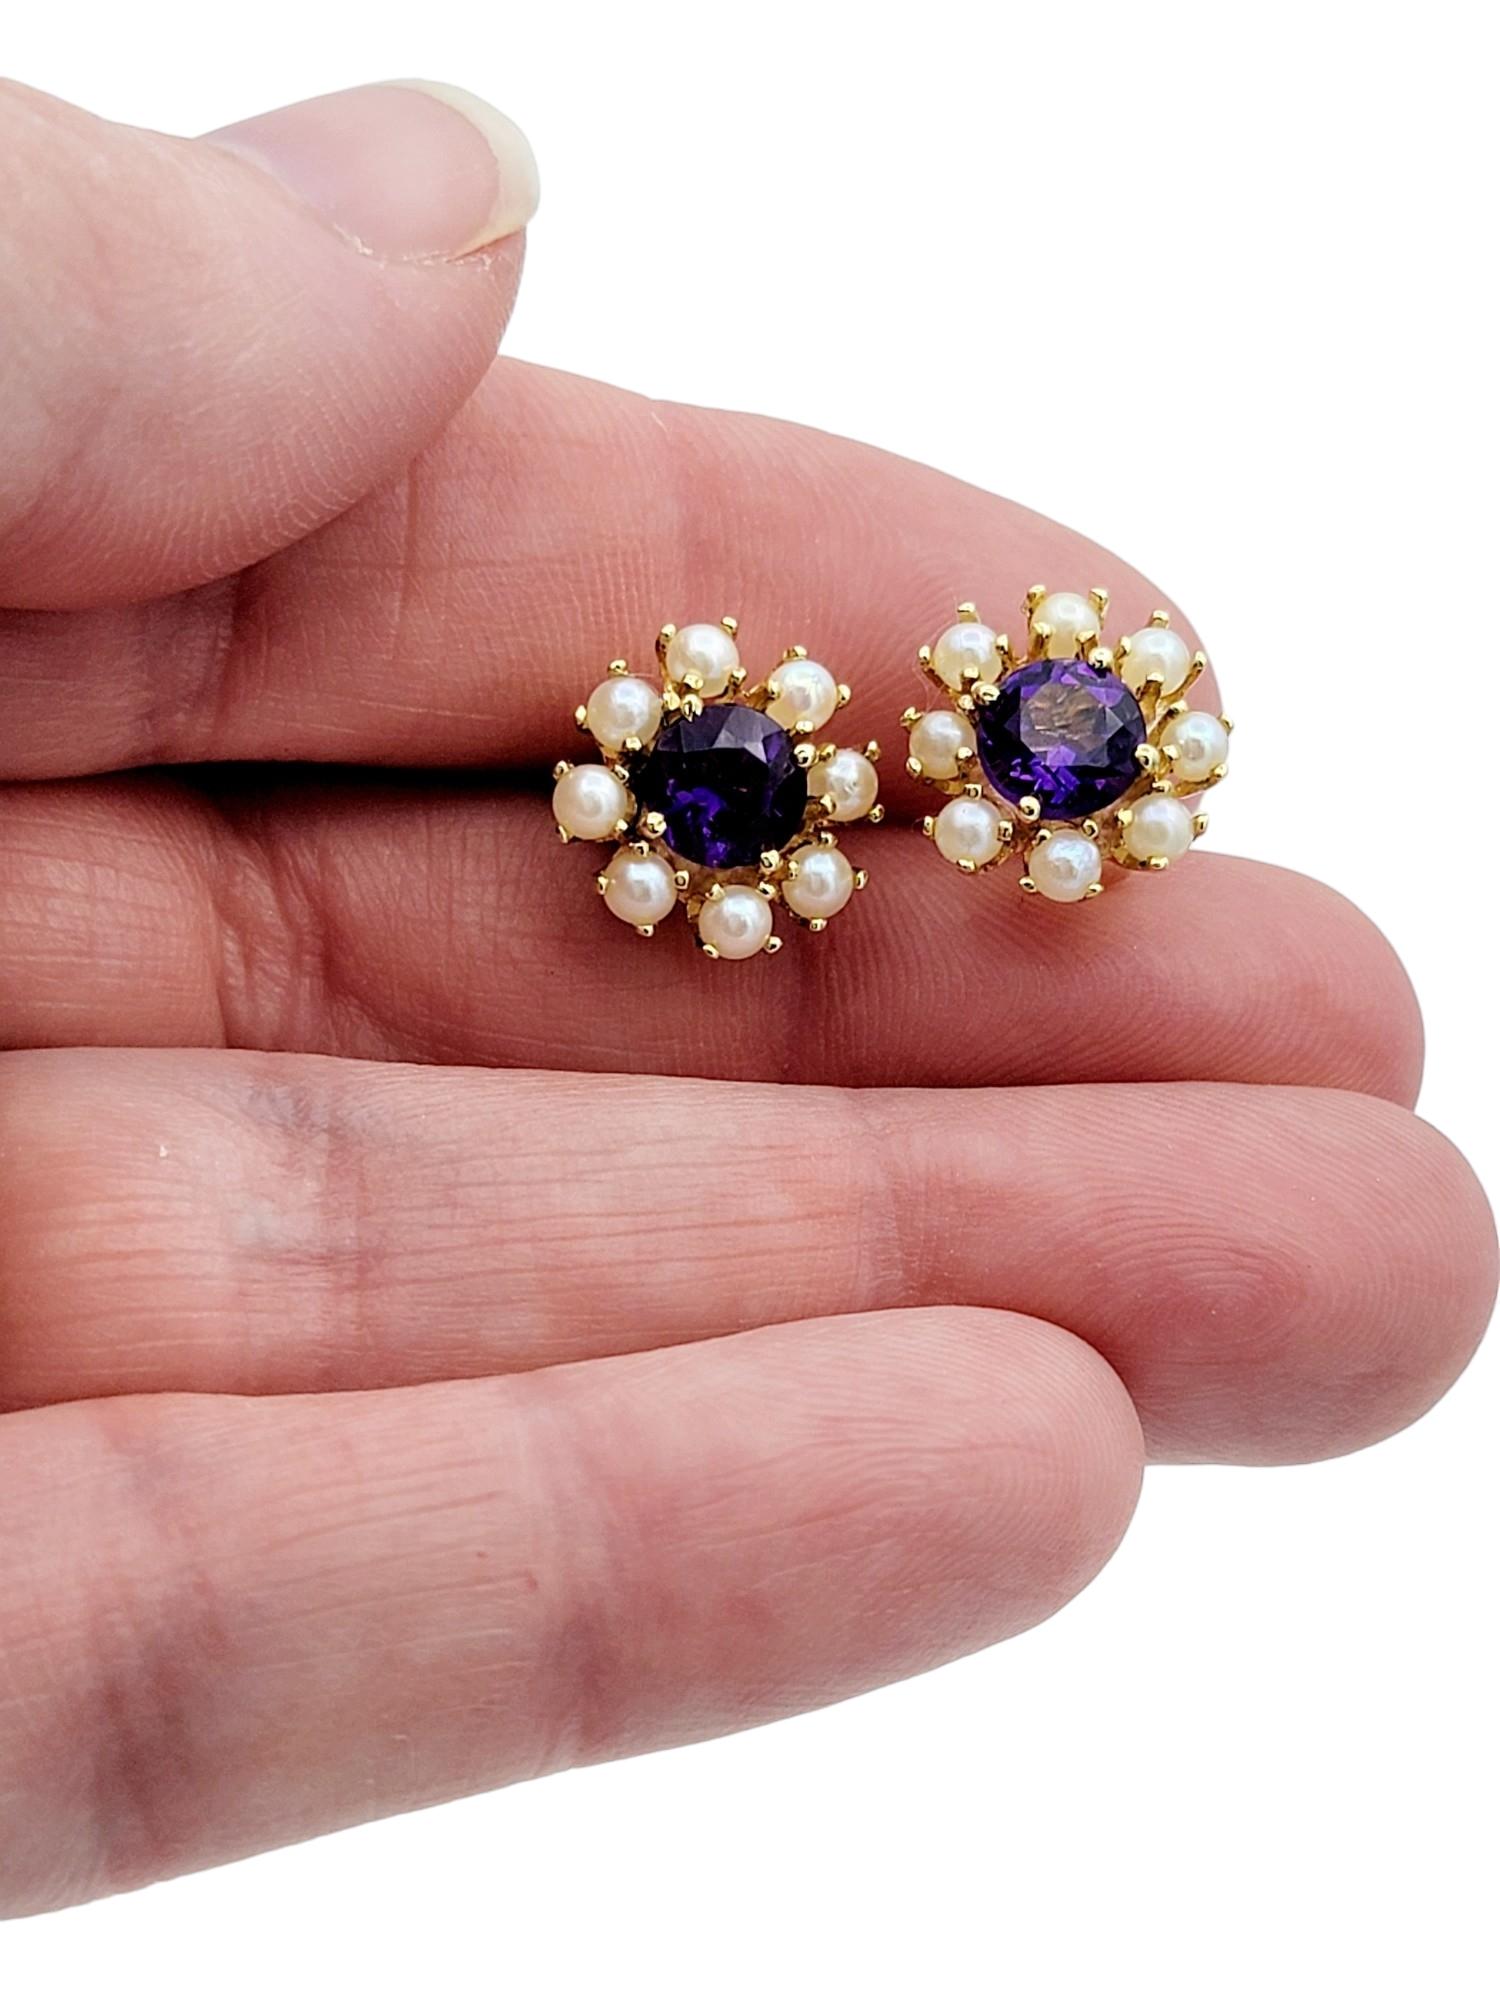 Round Amethyst and White Pearl Halo Stud Earrings Set in 14 Karat Yellow Gold In Good Condition For Sale In Scottsdale, AZ